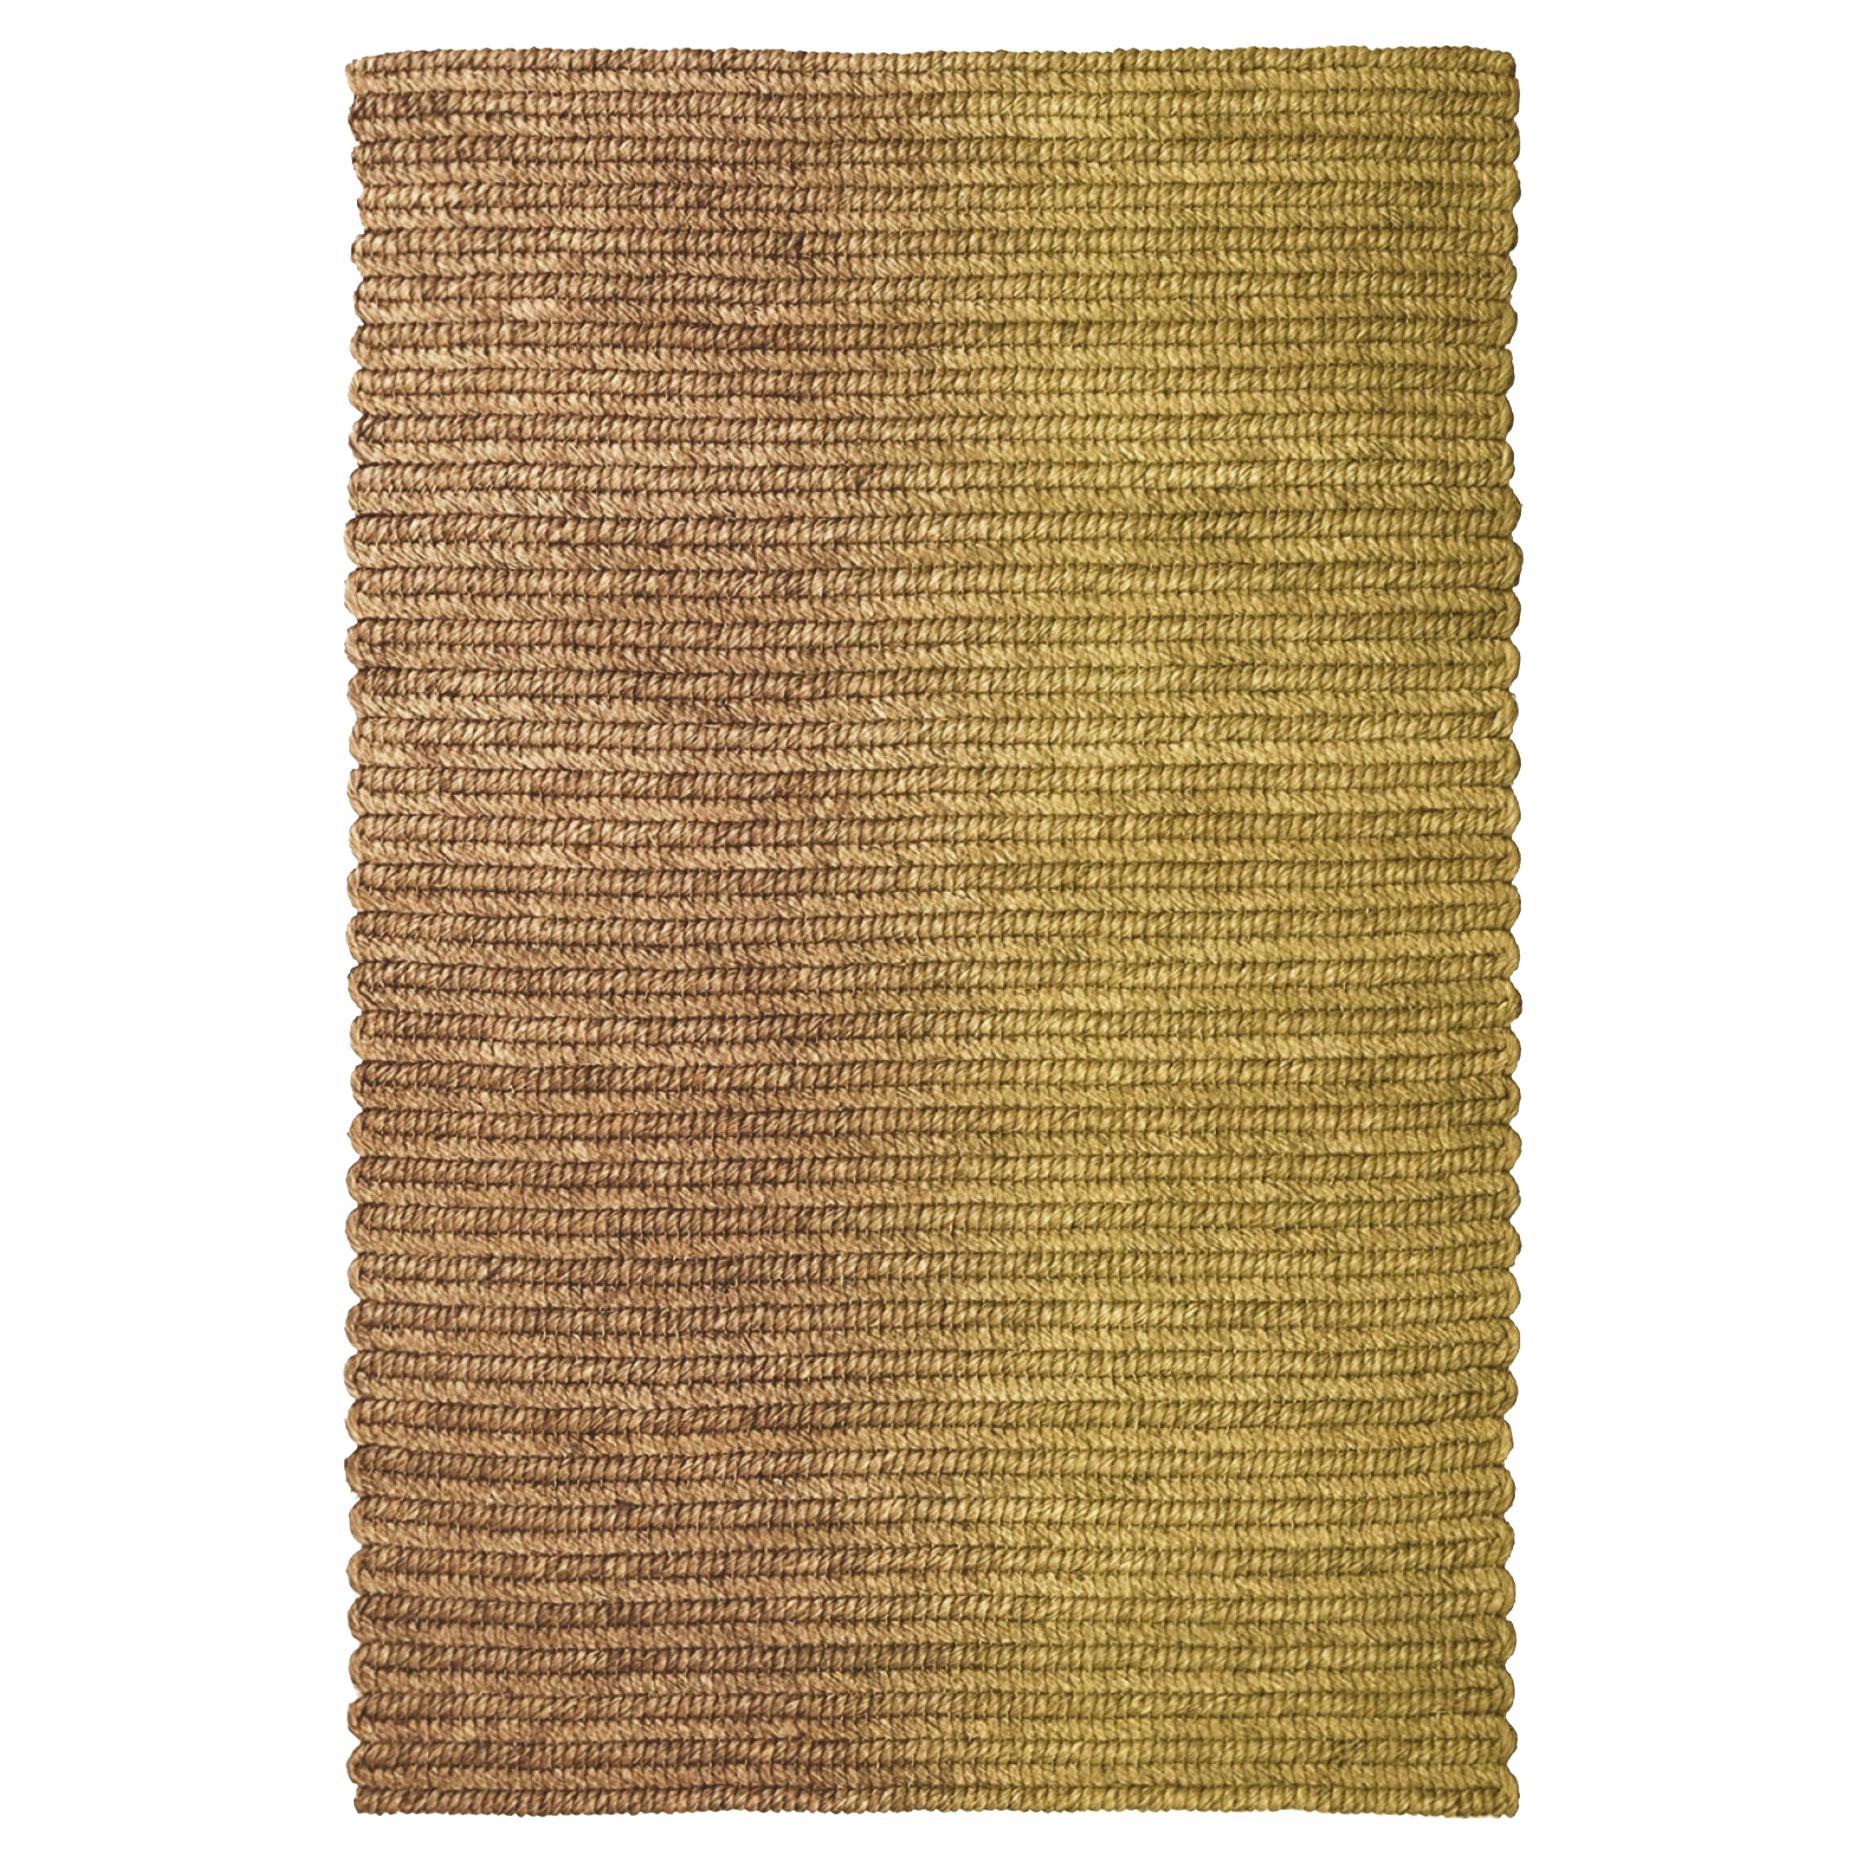 Claire Vos for Musett 'Switch' Abaca Indoor Rug in Spice, in 160 x 240 cm For Sale